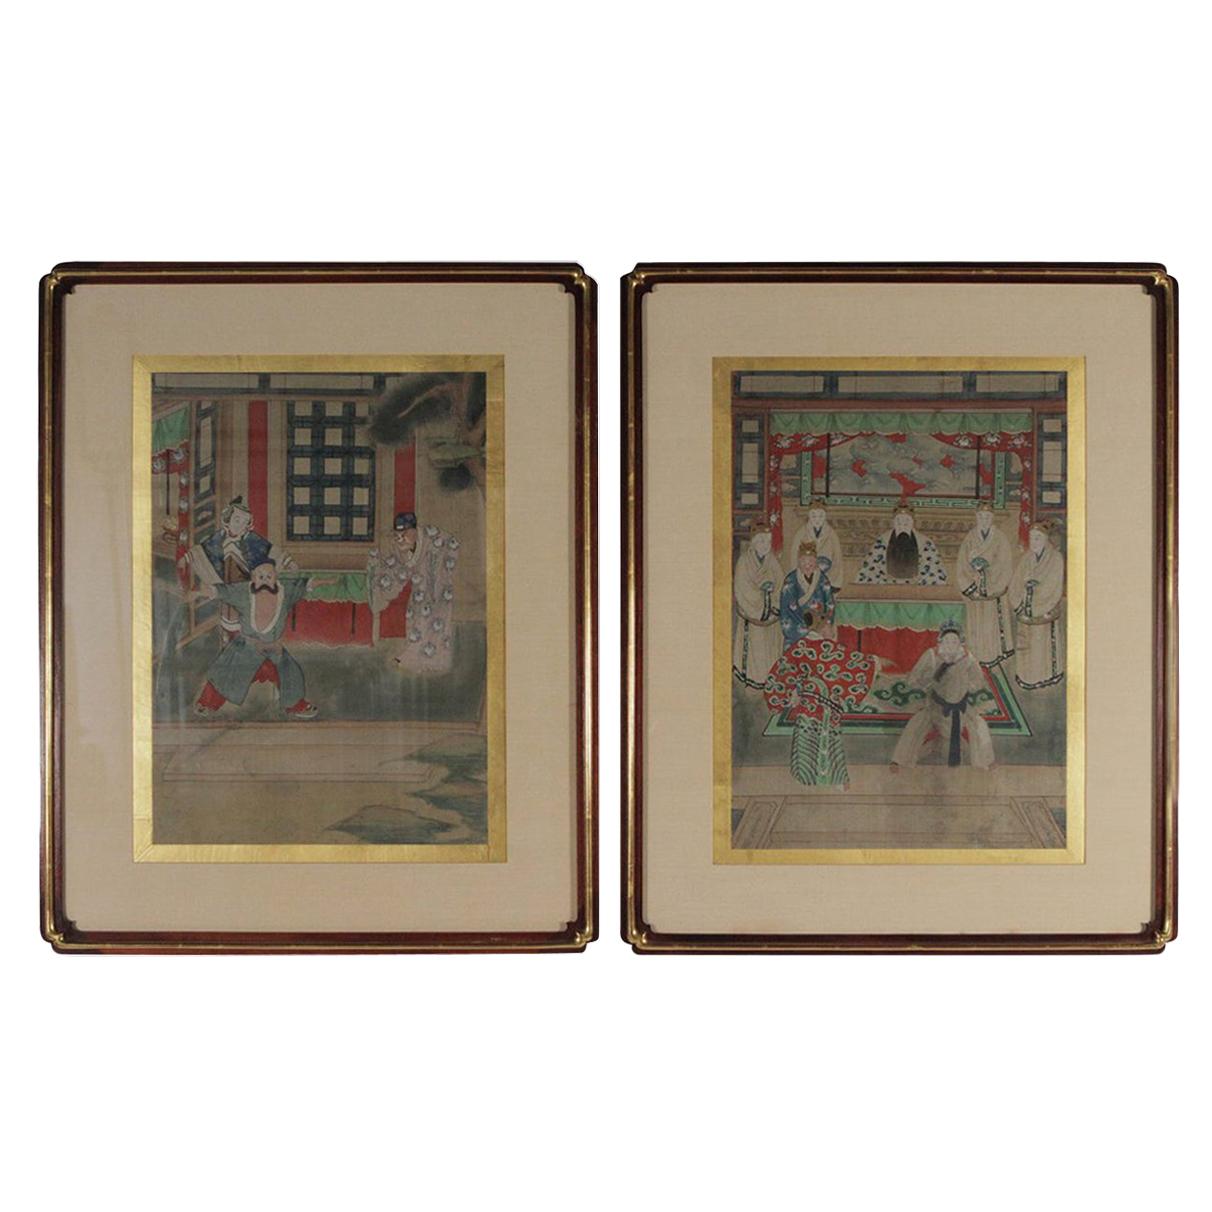 Pair of Early 1900s Asian Watercolors Mounted in Custom Frames